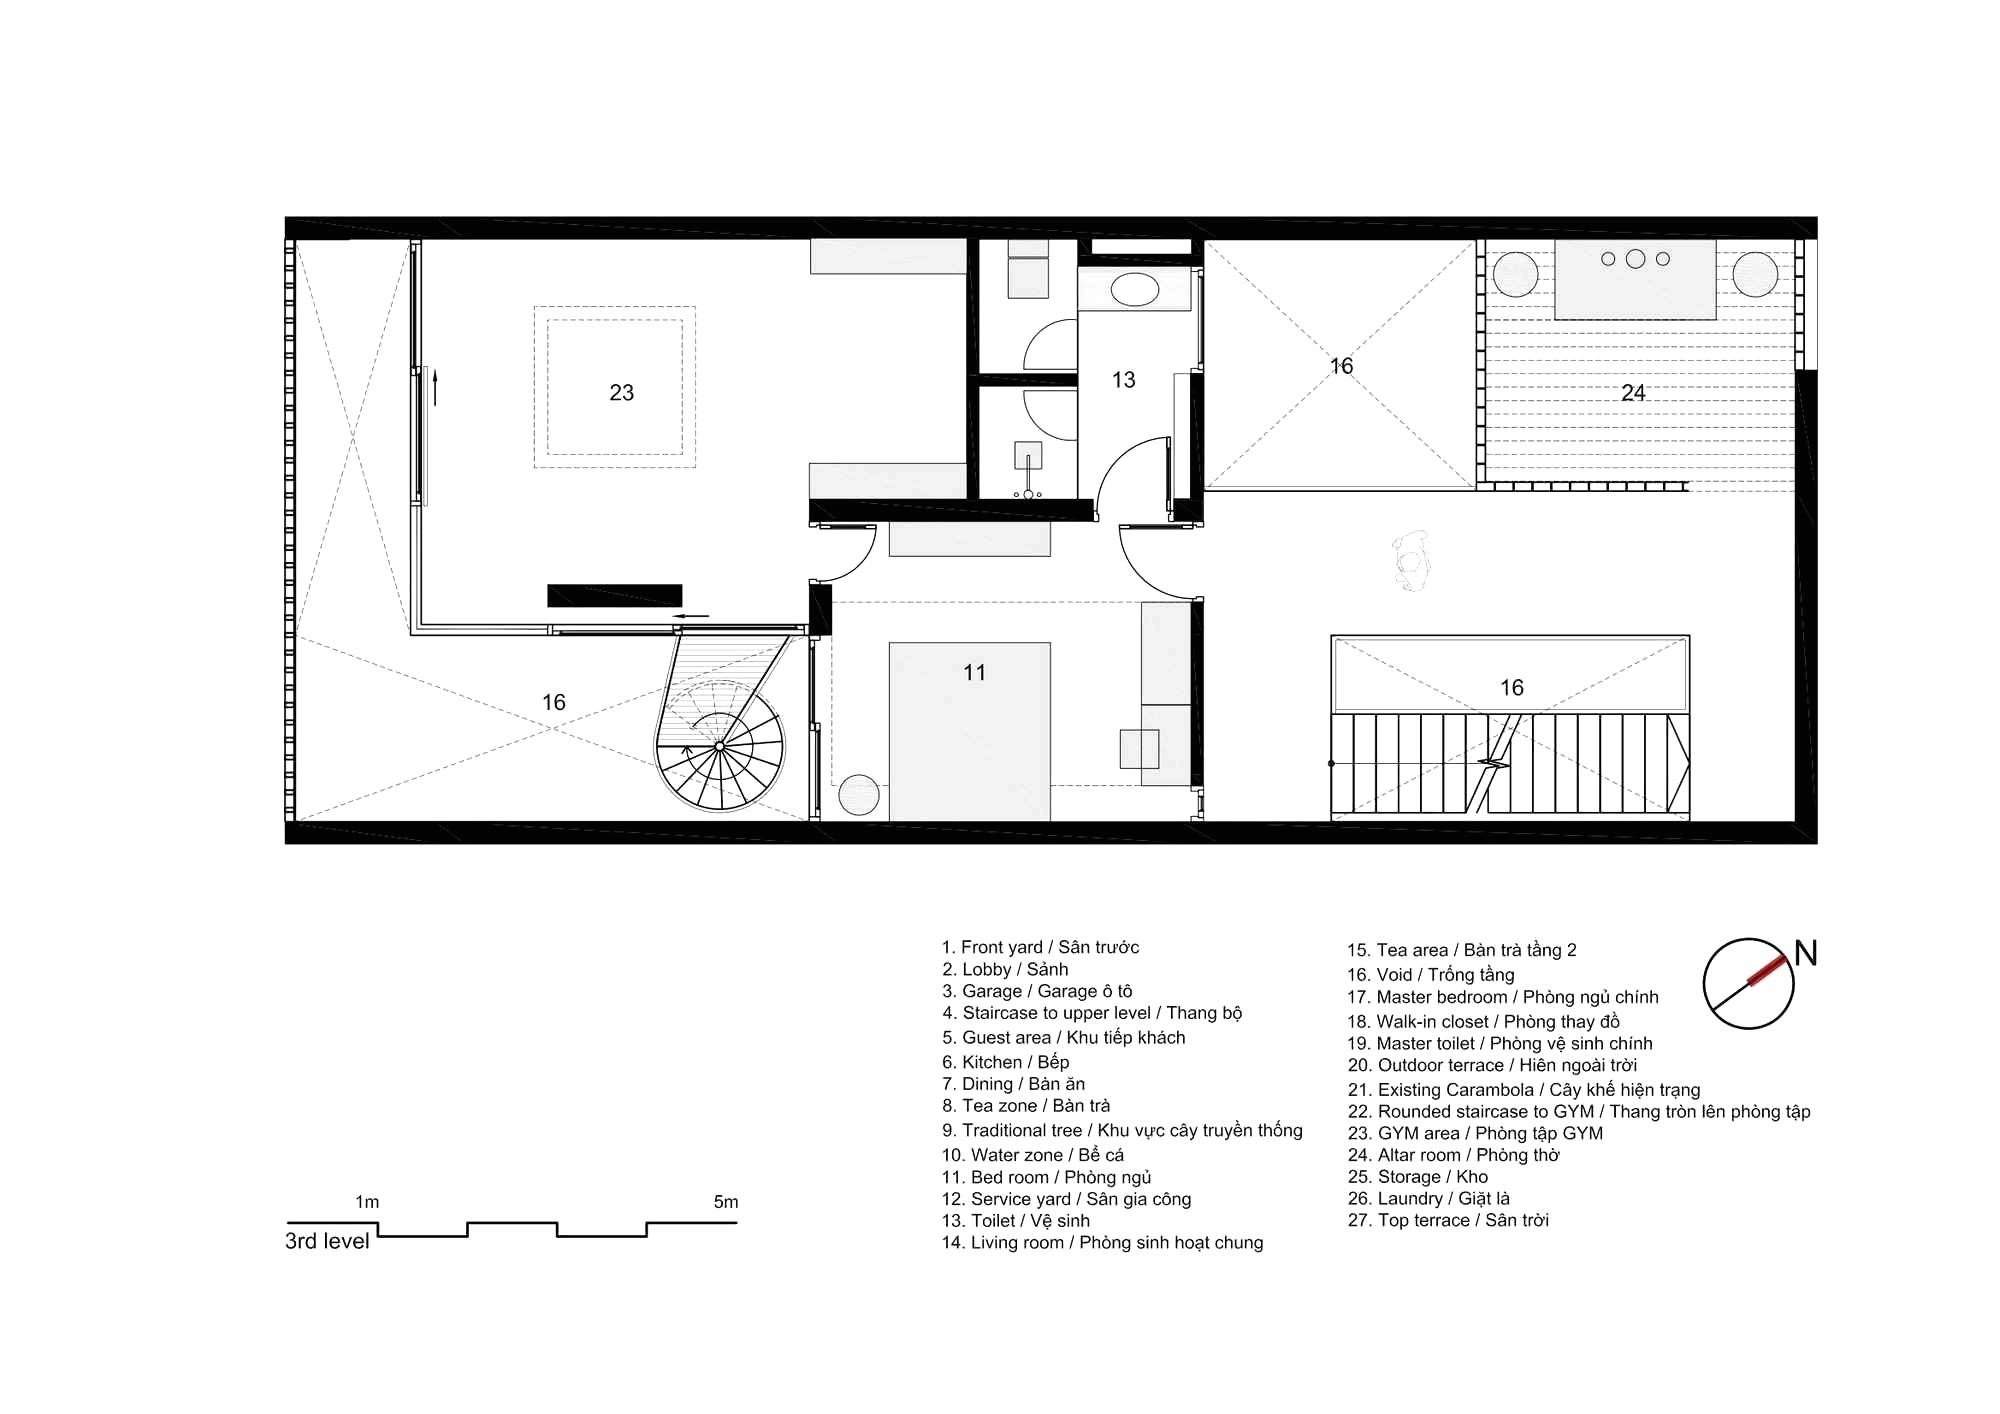 house floor plan designer awesome simple kitchen floor plans 0d kitchen restaurant floor plan